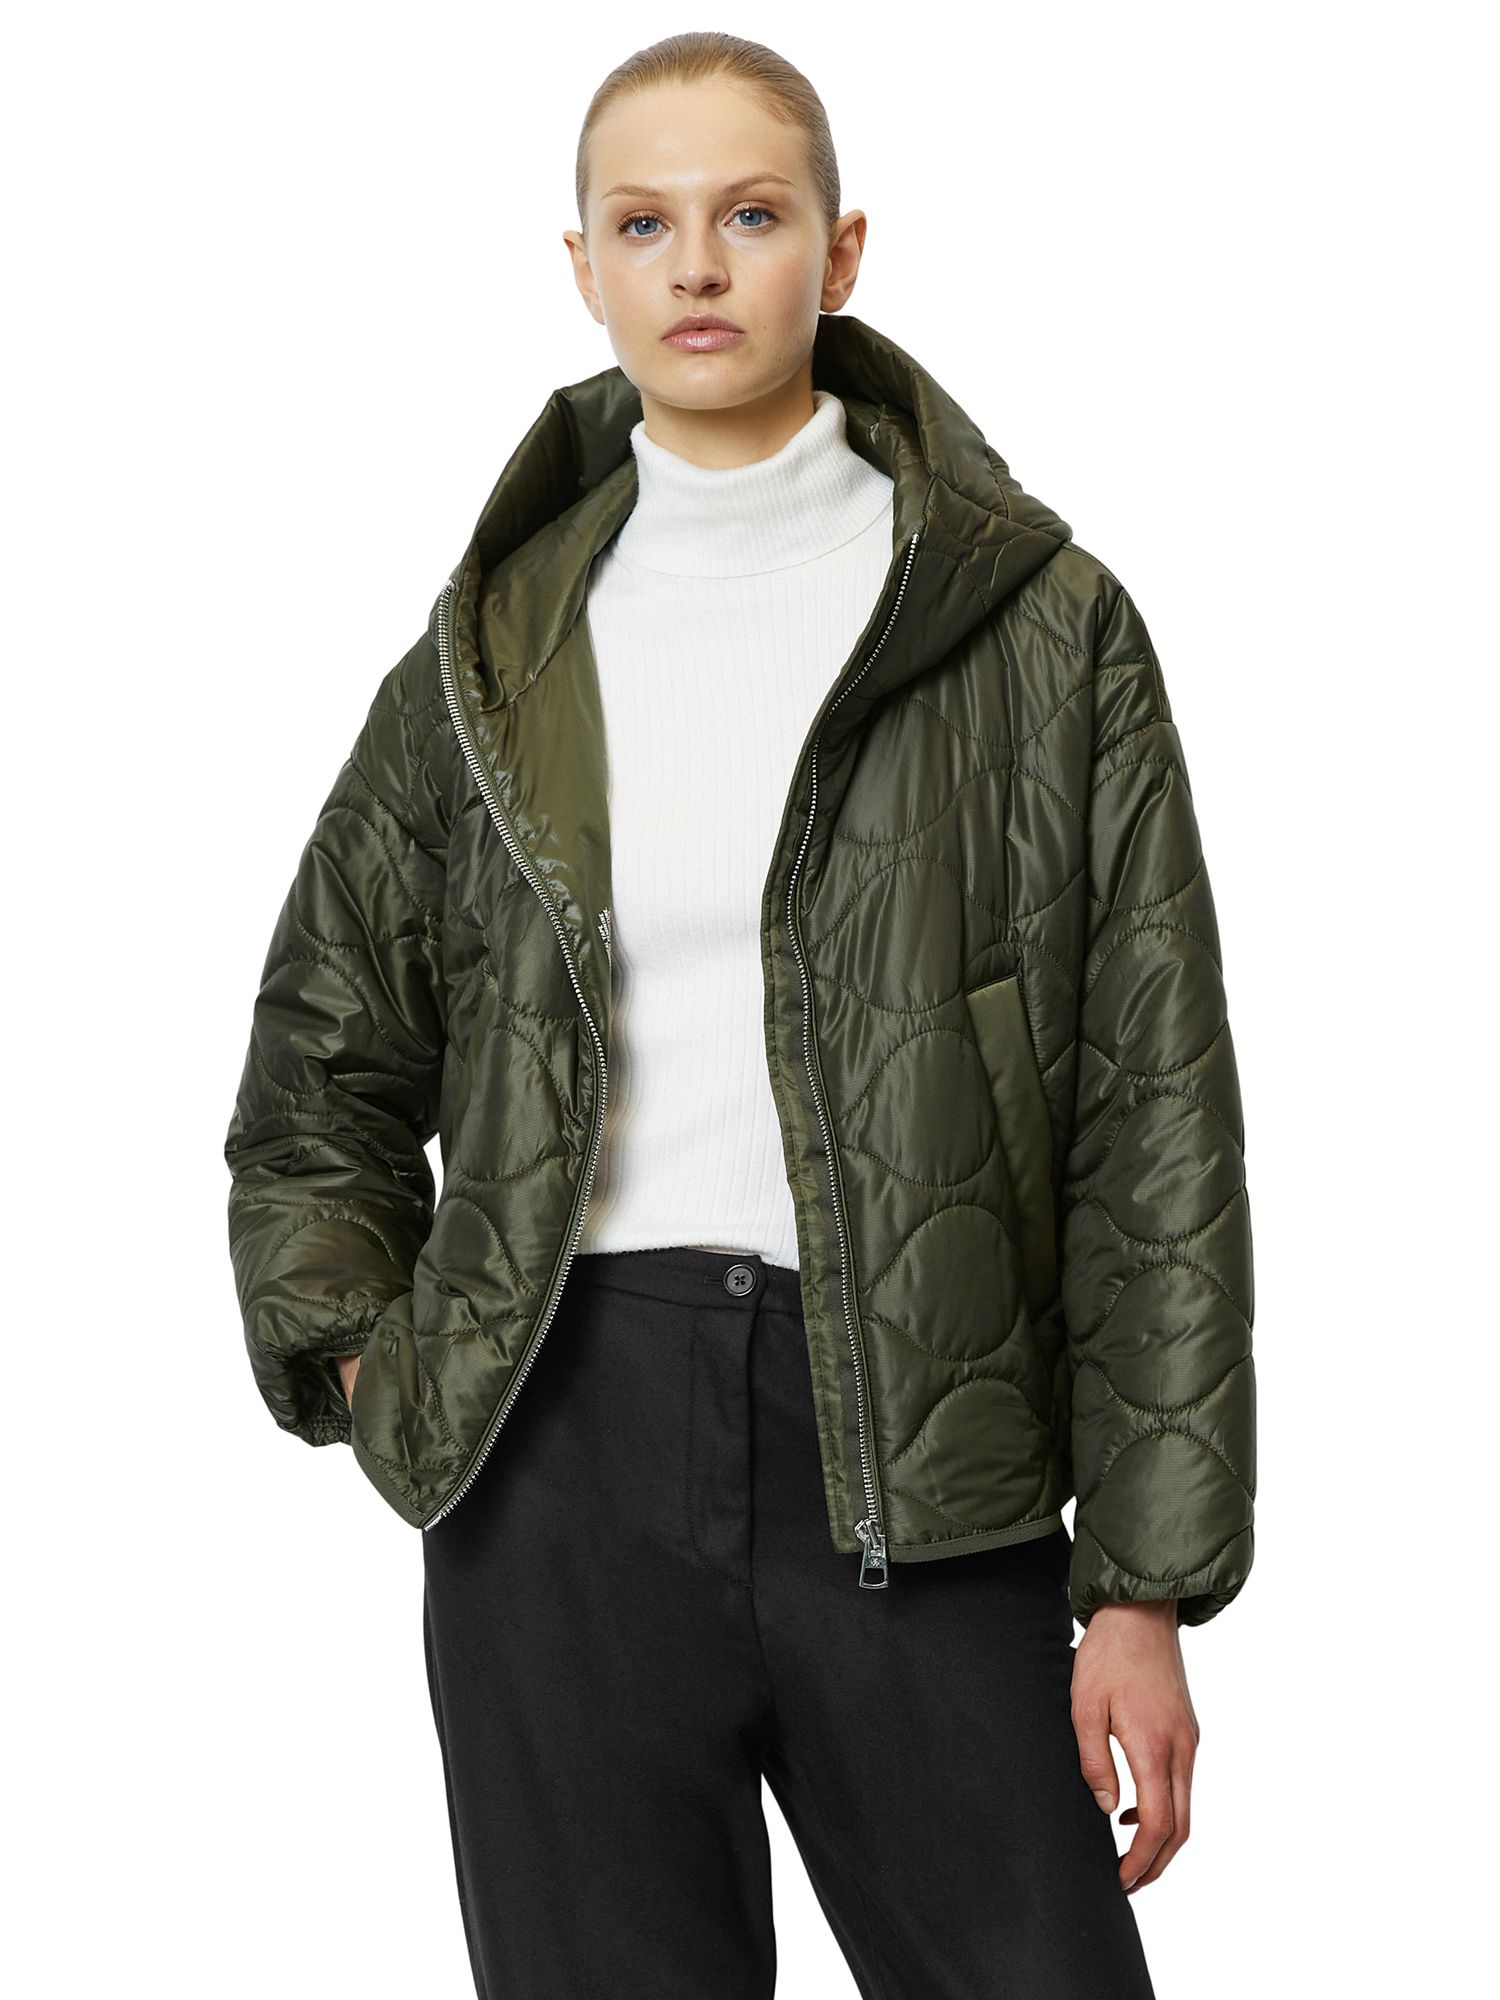 Marc O'Polo Hooded Cape Style Quilt Jacket, Olive at John Lewis & Partners